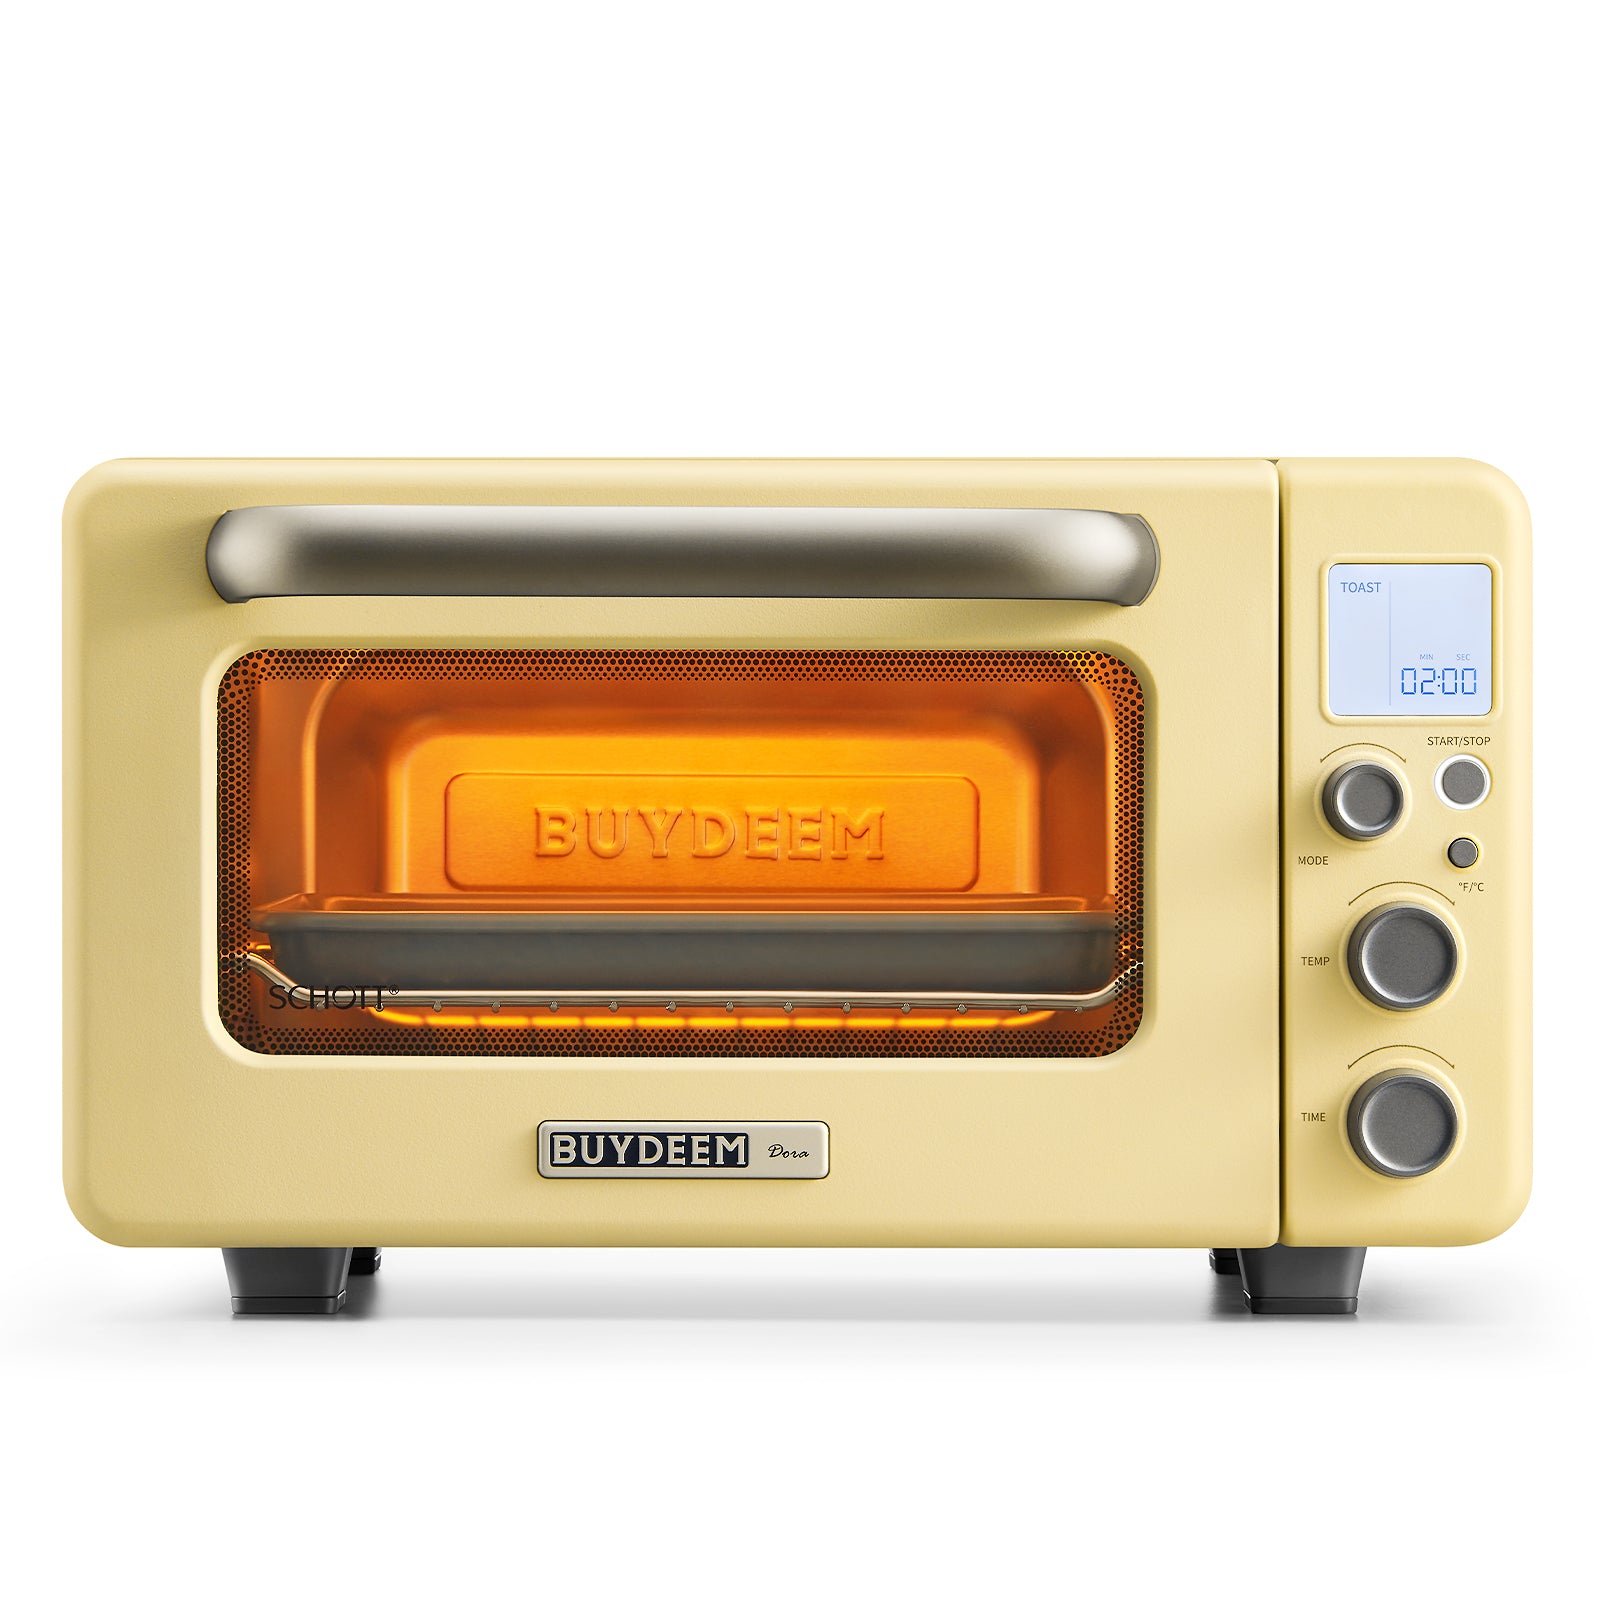 Best Small Countertop Ovens: Toaster Ovens, Convection Ovens, and More